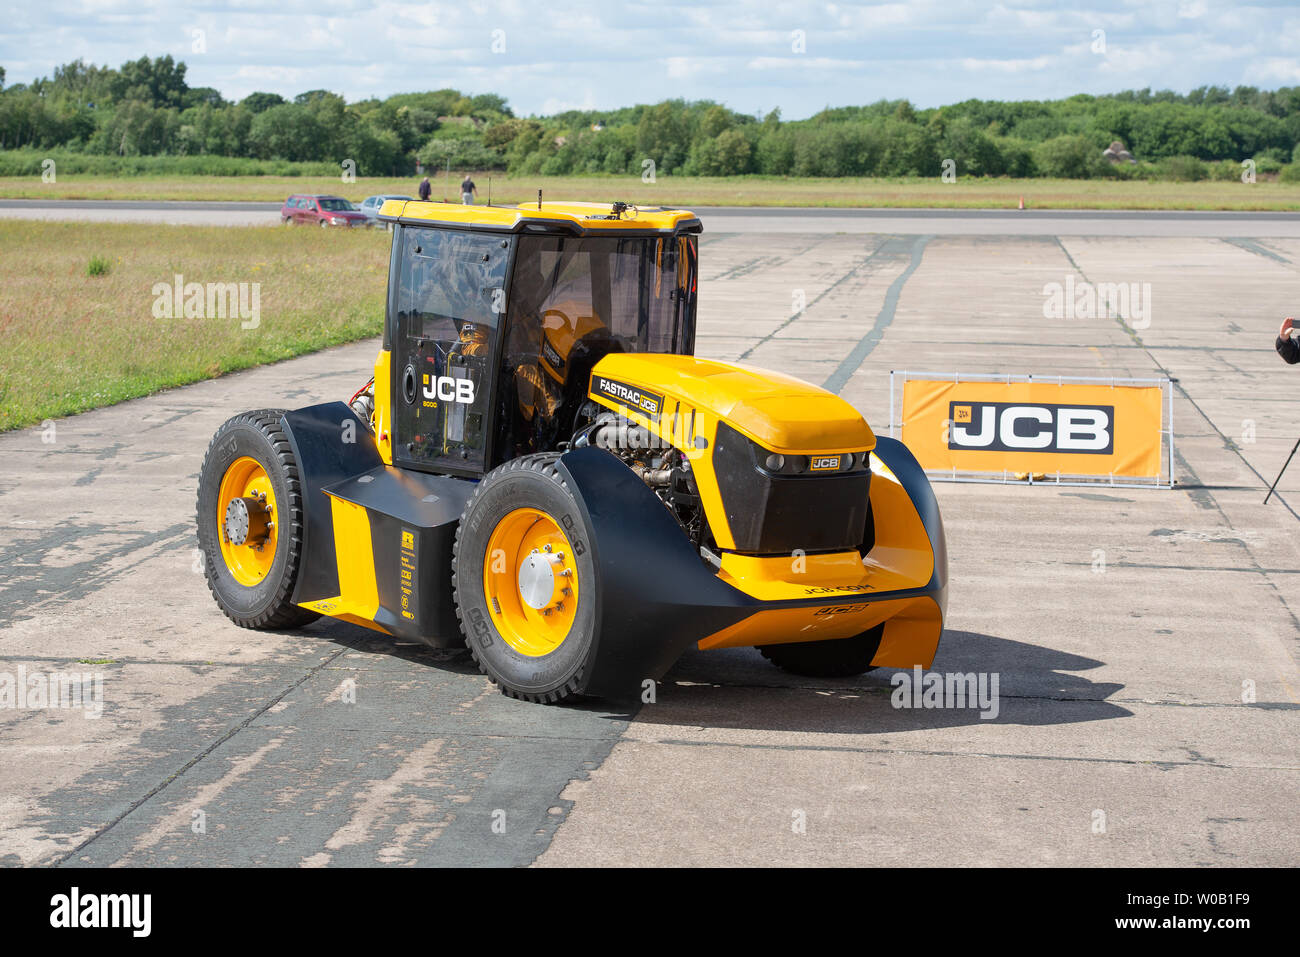 JCB Agri-machinery manufactures making a new British speed record for a tractor of 103.6 mph, beating the previous 87.27 mph record set in March 2018 Stock Photo